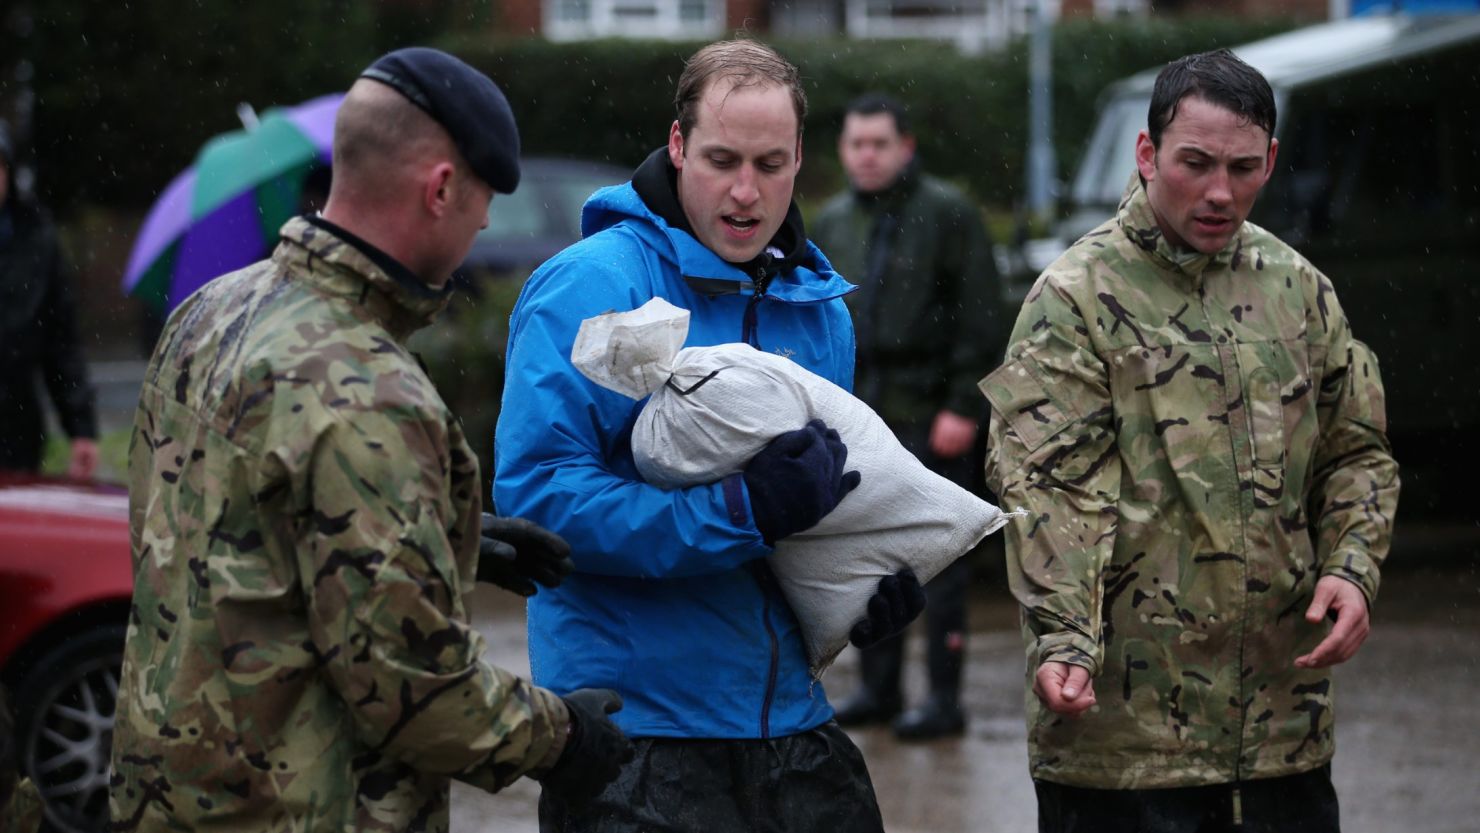 Prince William, Duke of Cambridge, helps with flood defenses on February 14, 2014 in Datchet, United Kingdom. 